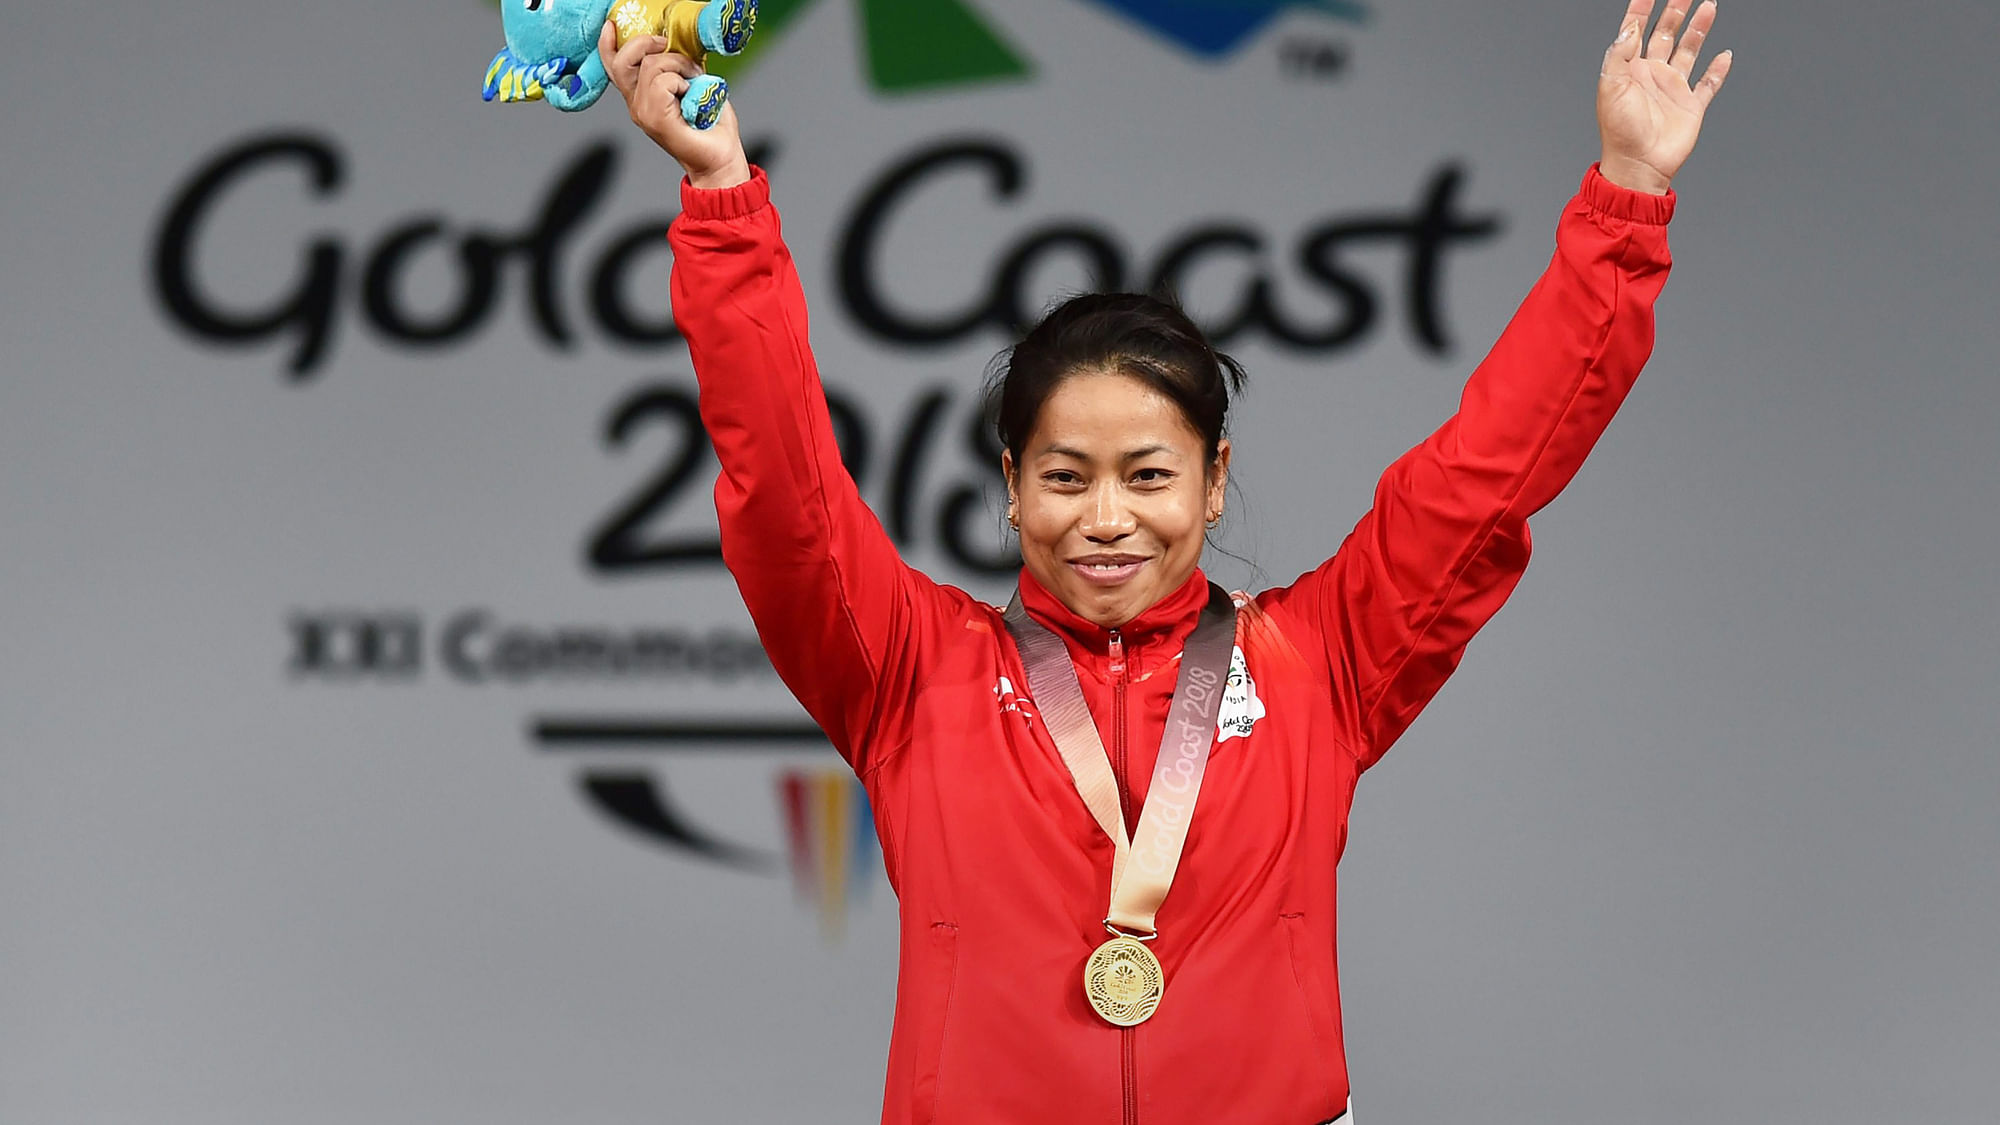 Two time Commonwealth Games gold medallist Sanjita Chanu has been provisionally suspended after failing a dope test.